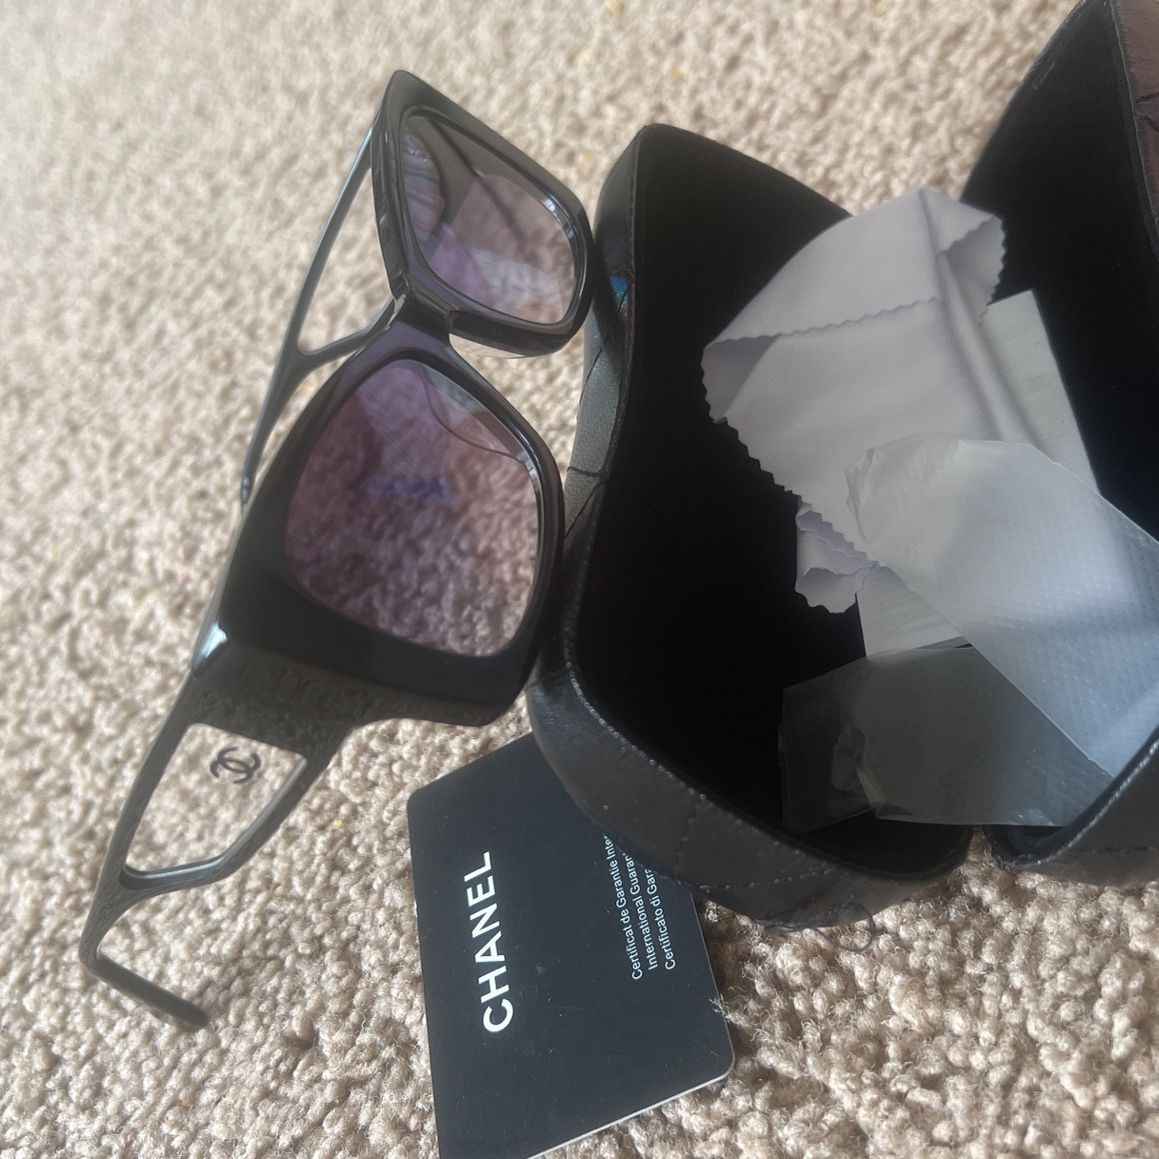 CHANEL Sunglasses for Women for sale